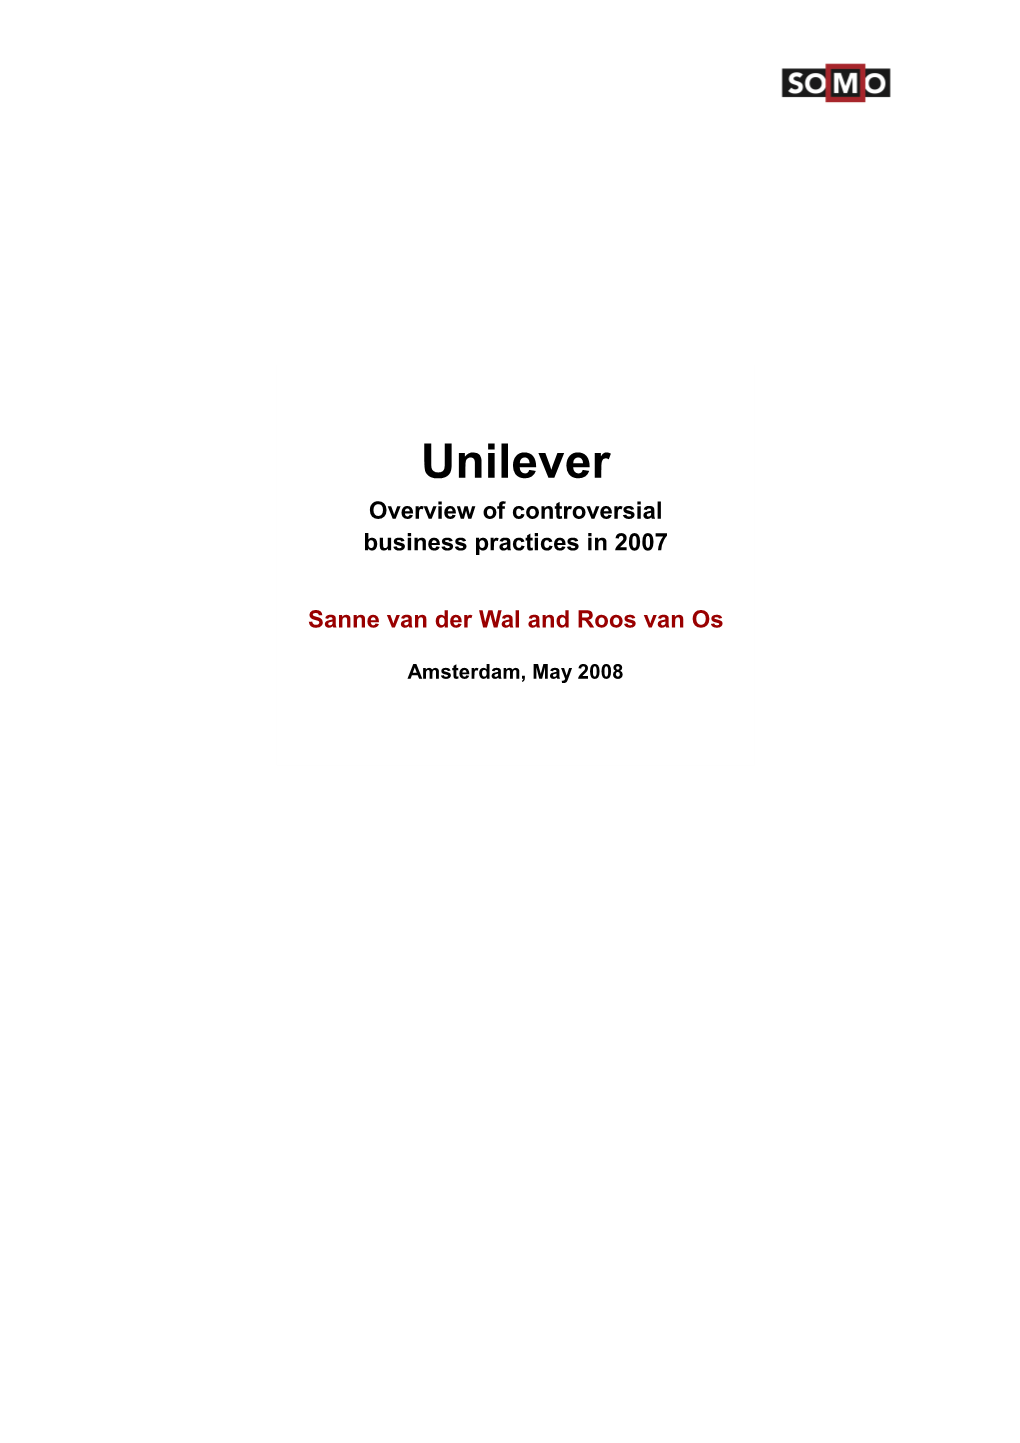 Unilever Overview of Controversial Business Practices in 2007